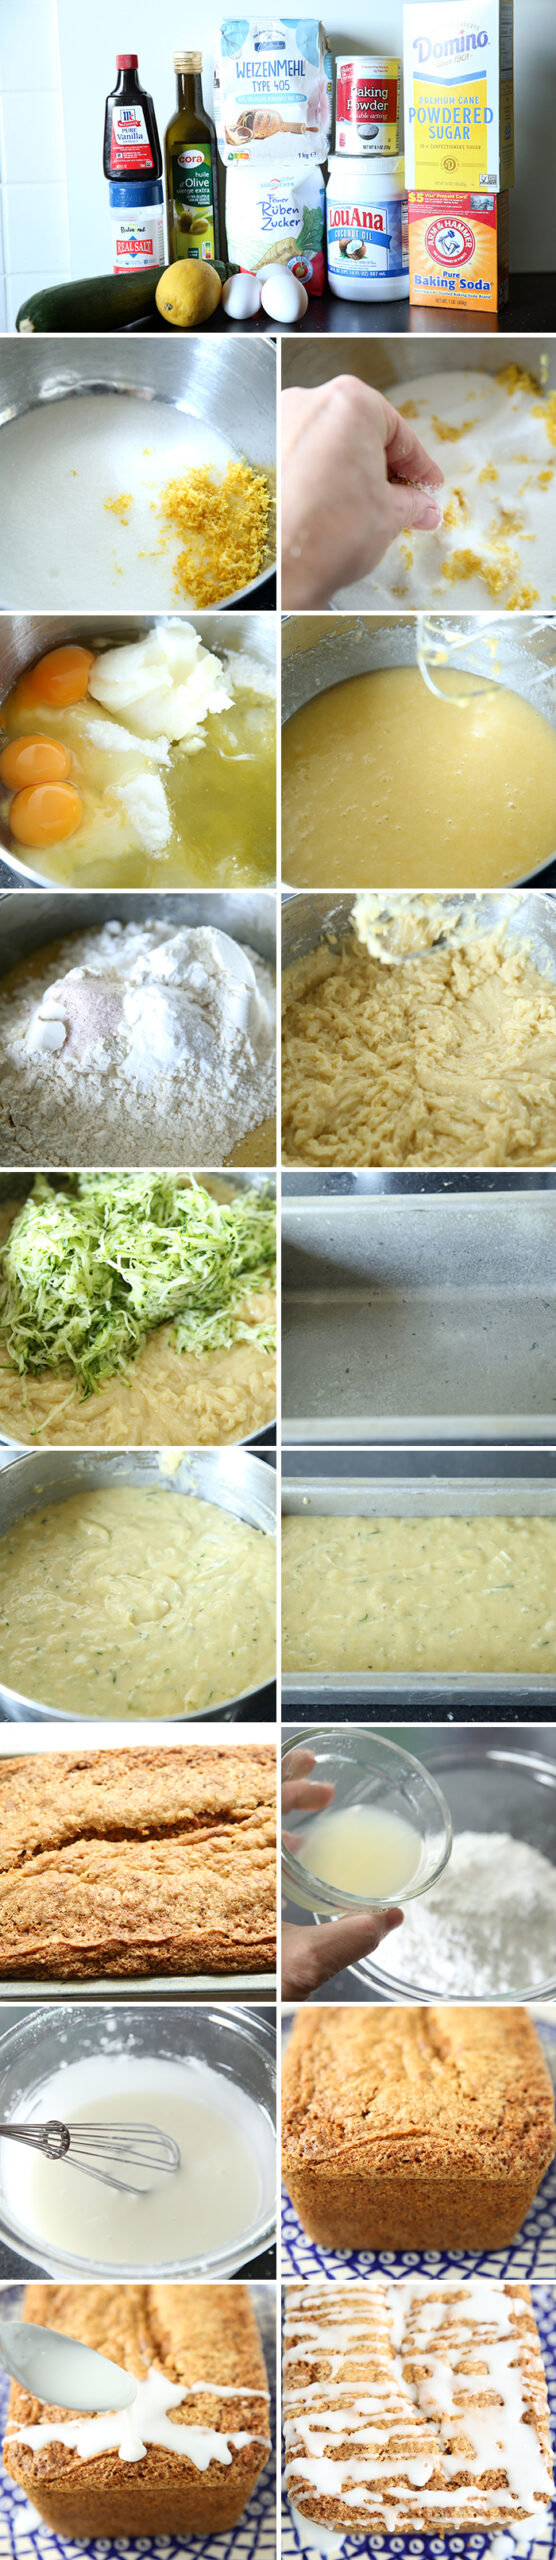 17-photo picture collage of step-by-step photos on how to make Glazed Lemon Zucchini Bread.